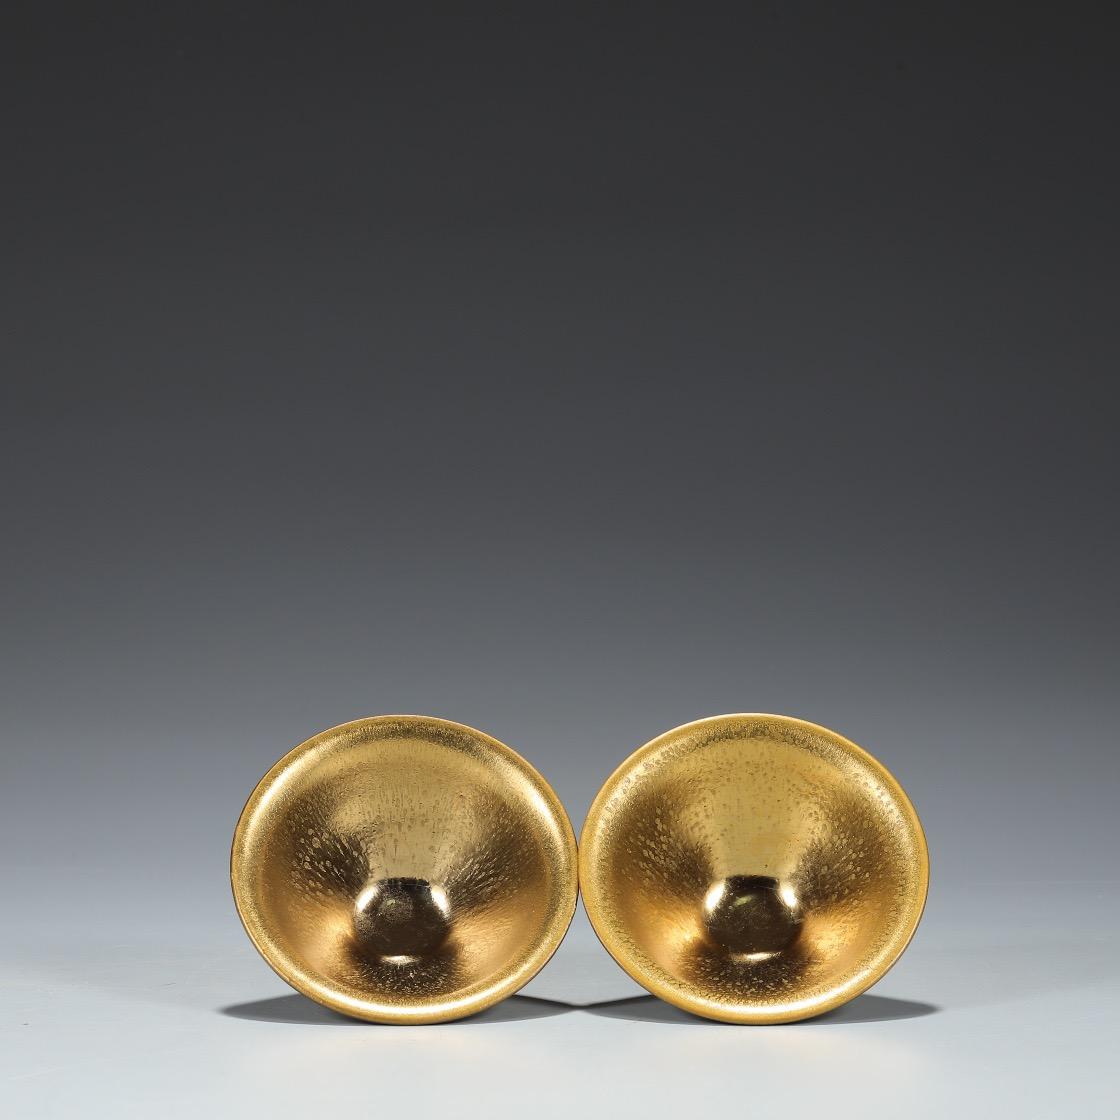 19th Century Northern Song Dynasty Jian Kiln Gold Glaze Oil Dripping Bowls Pair For Sale